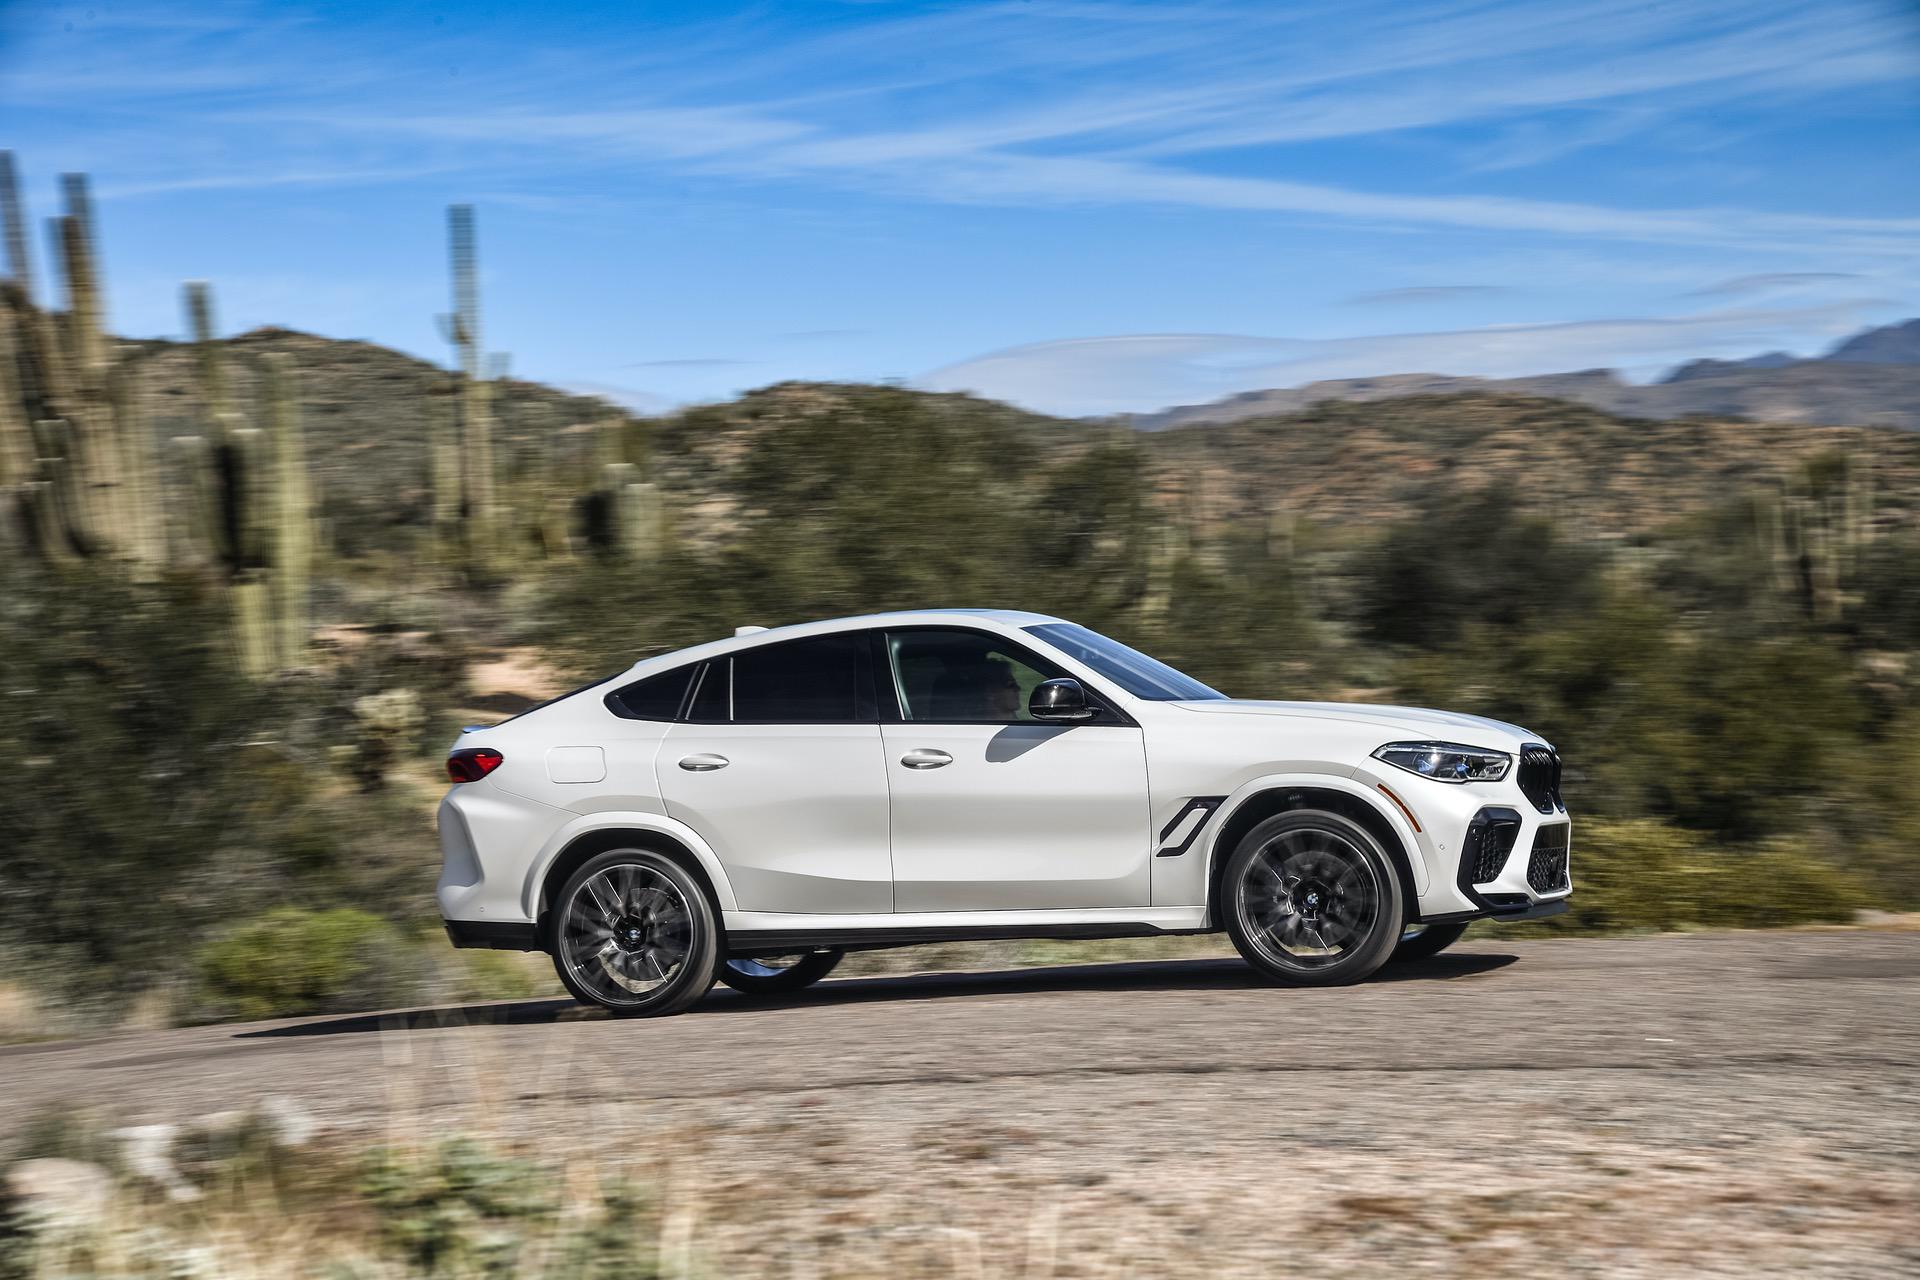 X6 competition. BMW x6 m Competition 2020. БМВ x6 m Competition 2022. BMW x6m 2020 белый. BMW x6 m 2021.